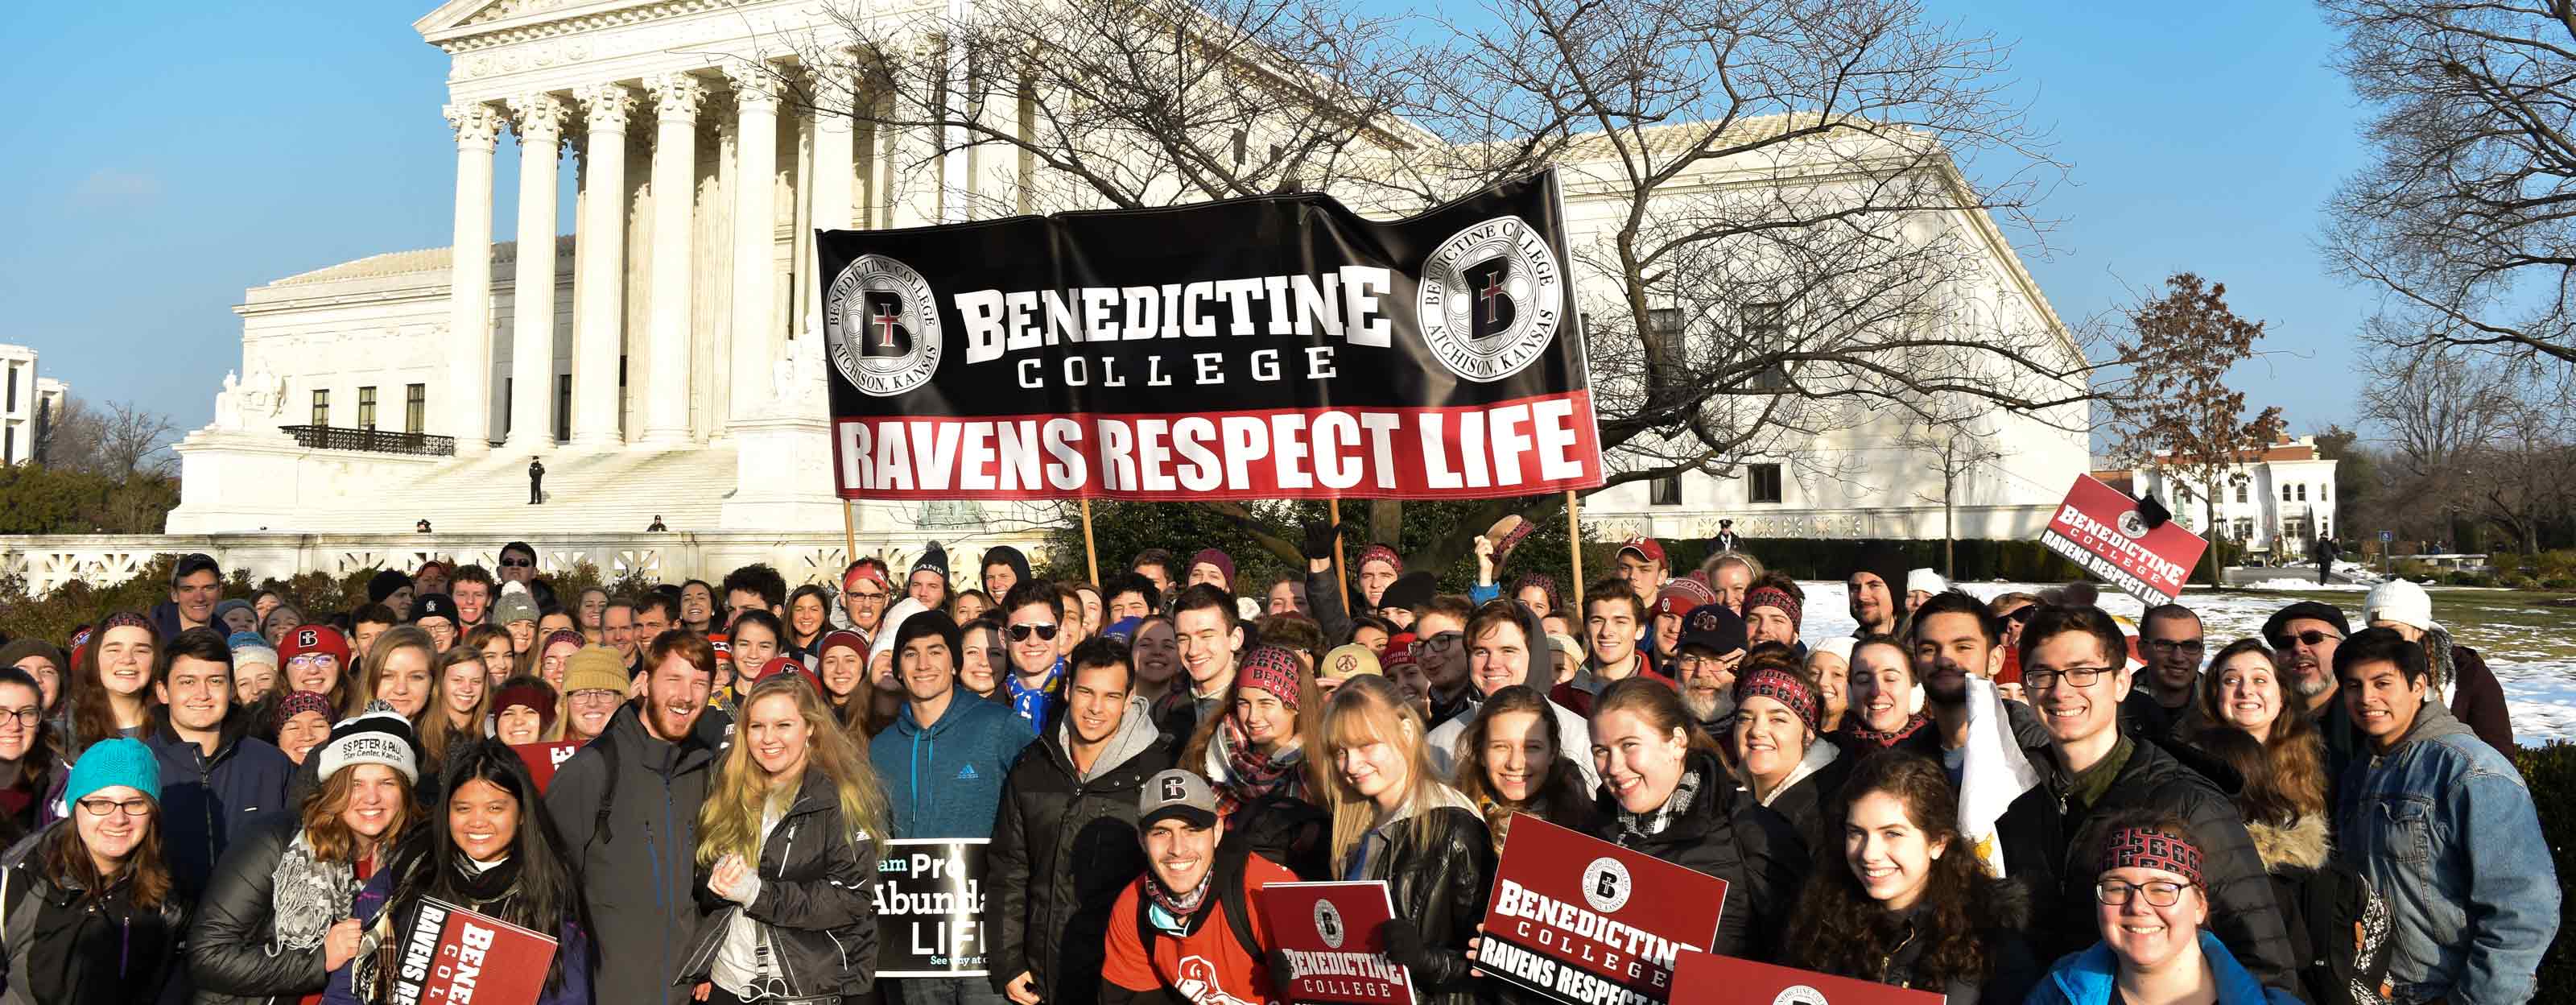 Students on the March for Life stand in front of the Supreme Court building in Washington, D.C.